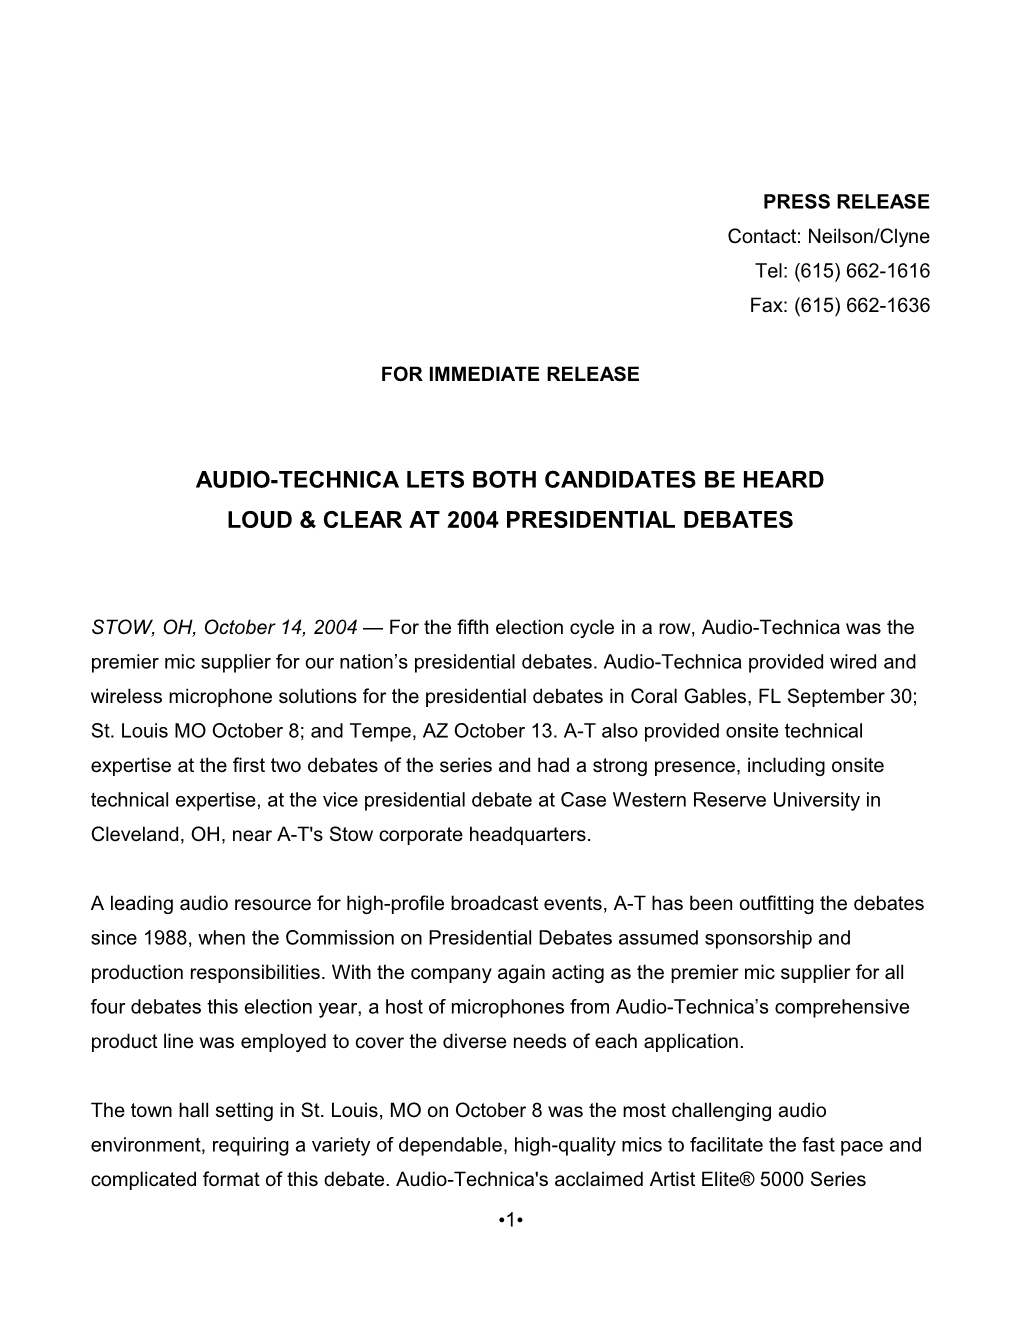 Audio-Technica Lets Both Candidates Be Heard